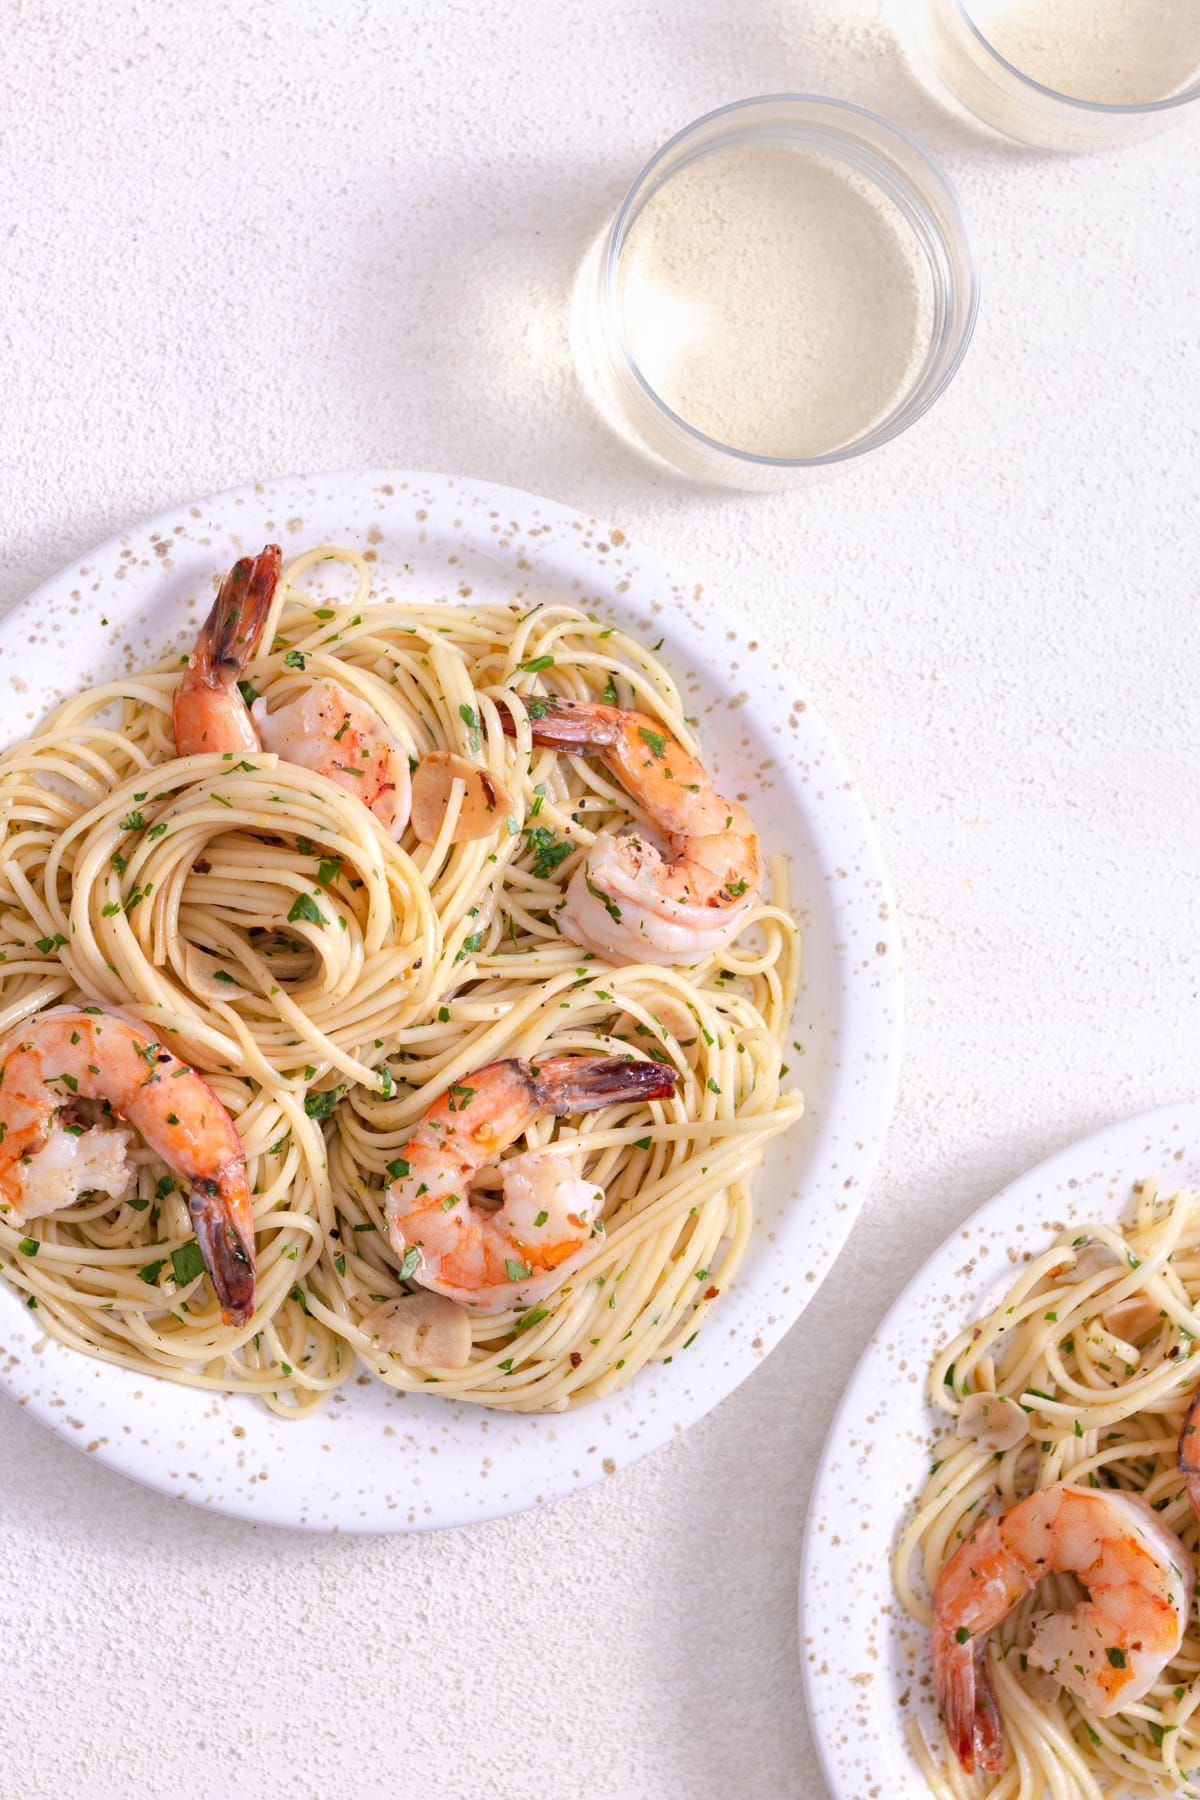 Overhead view of two plates of spaghetti with shrimp next to glasses of wine on a white plaster surface.